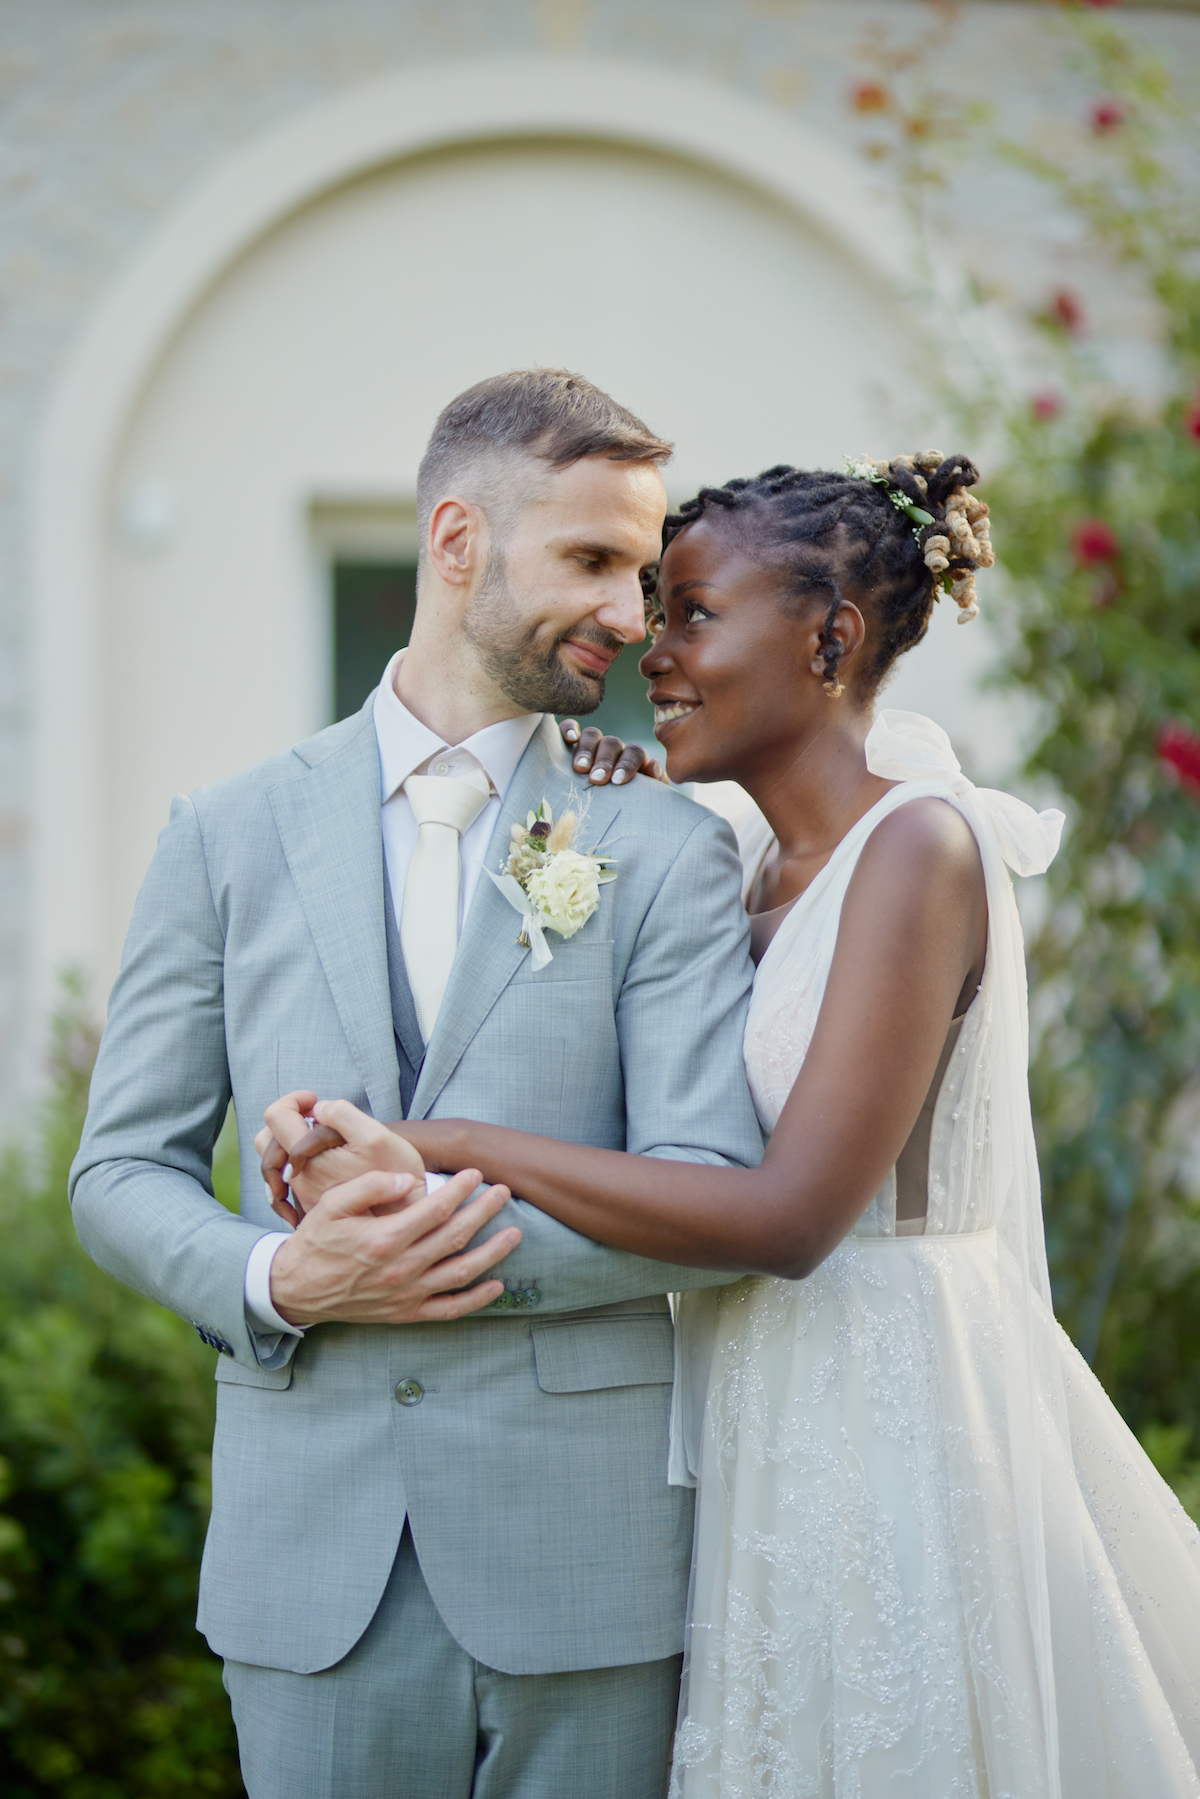 Wanderlust couple, Rumbi and Tom, are back to share all the details from their second white wedding in the Czech Republic! 